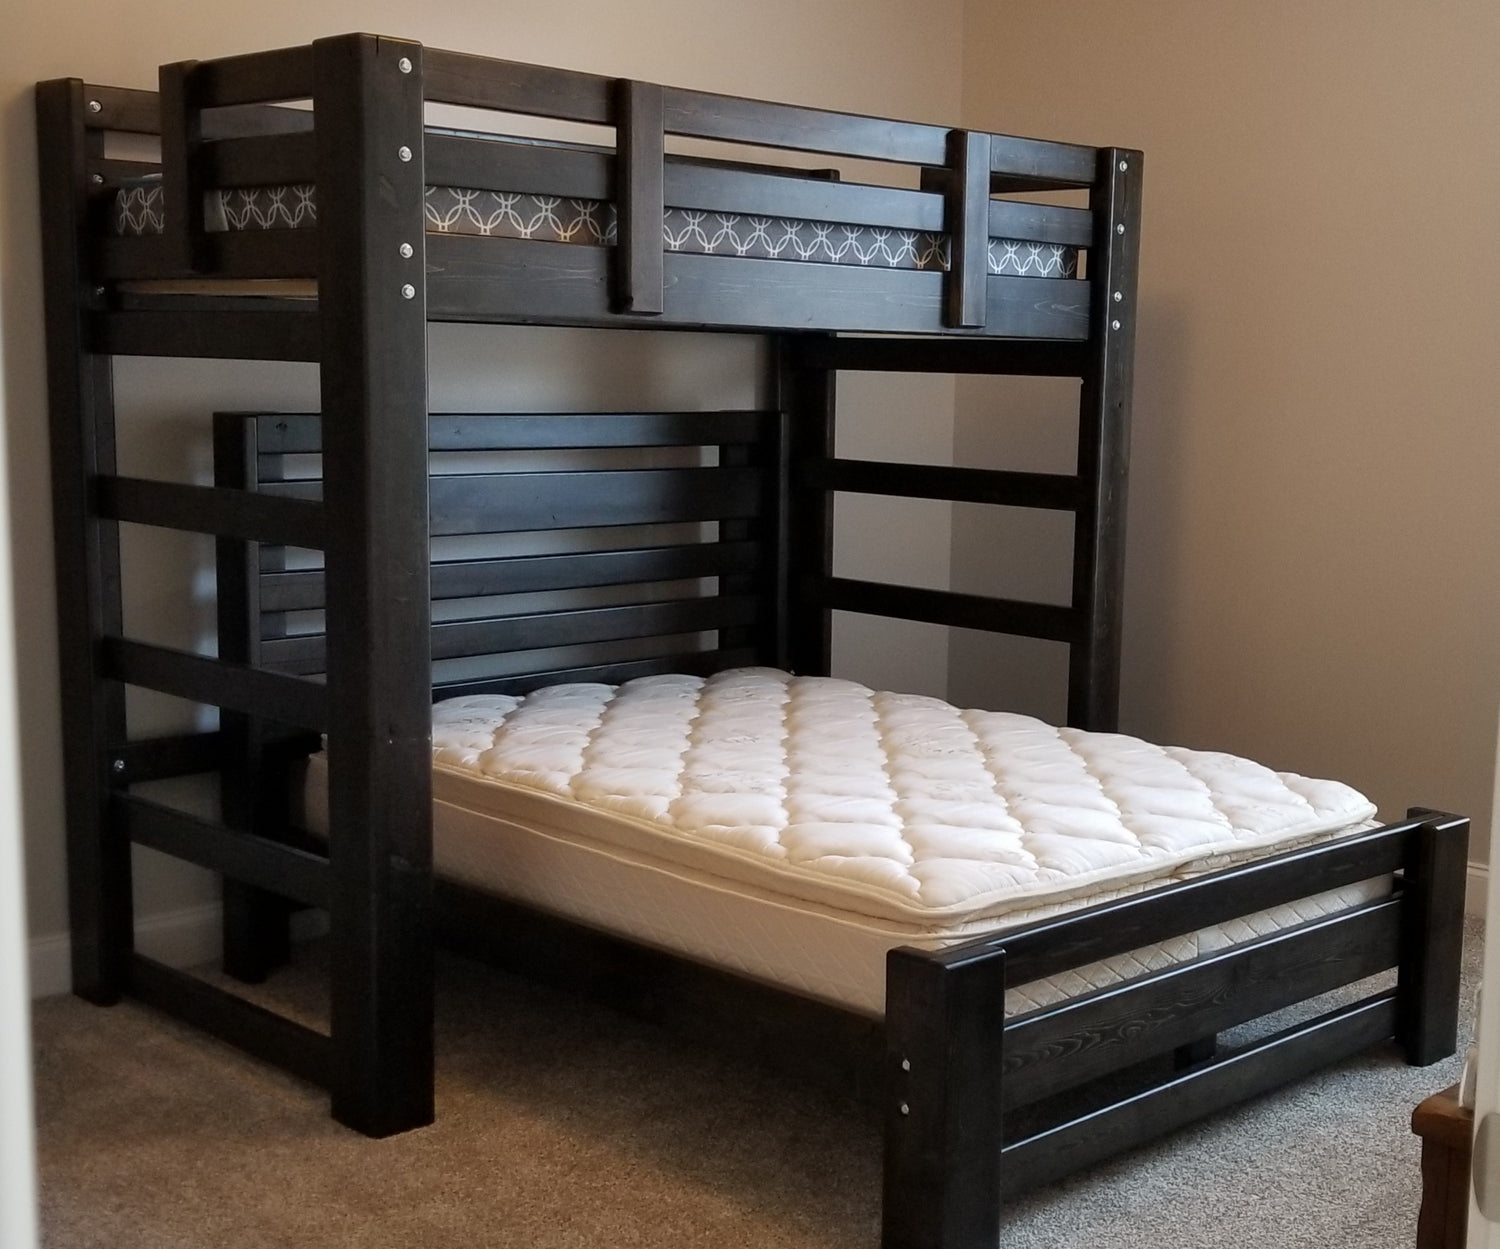 T-Shape Style Bunk Bed